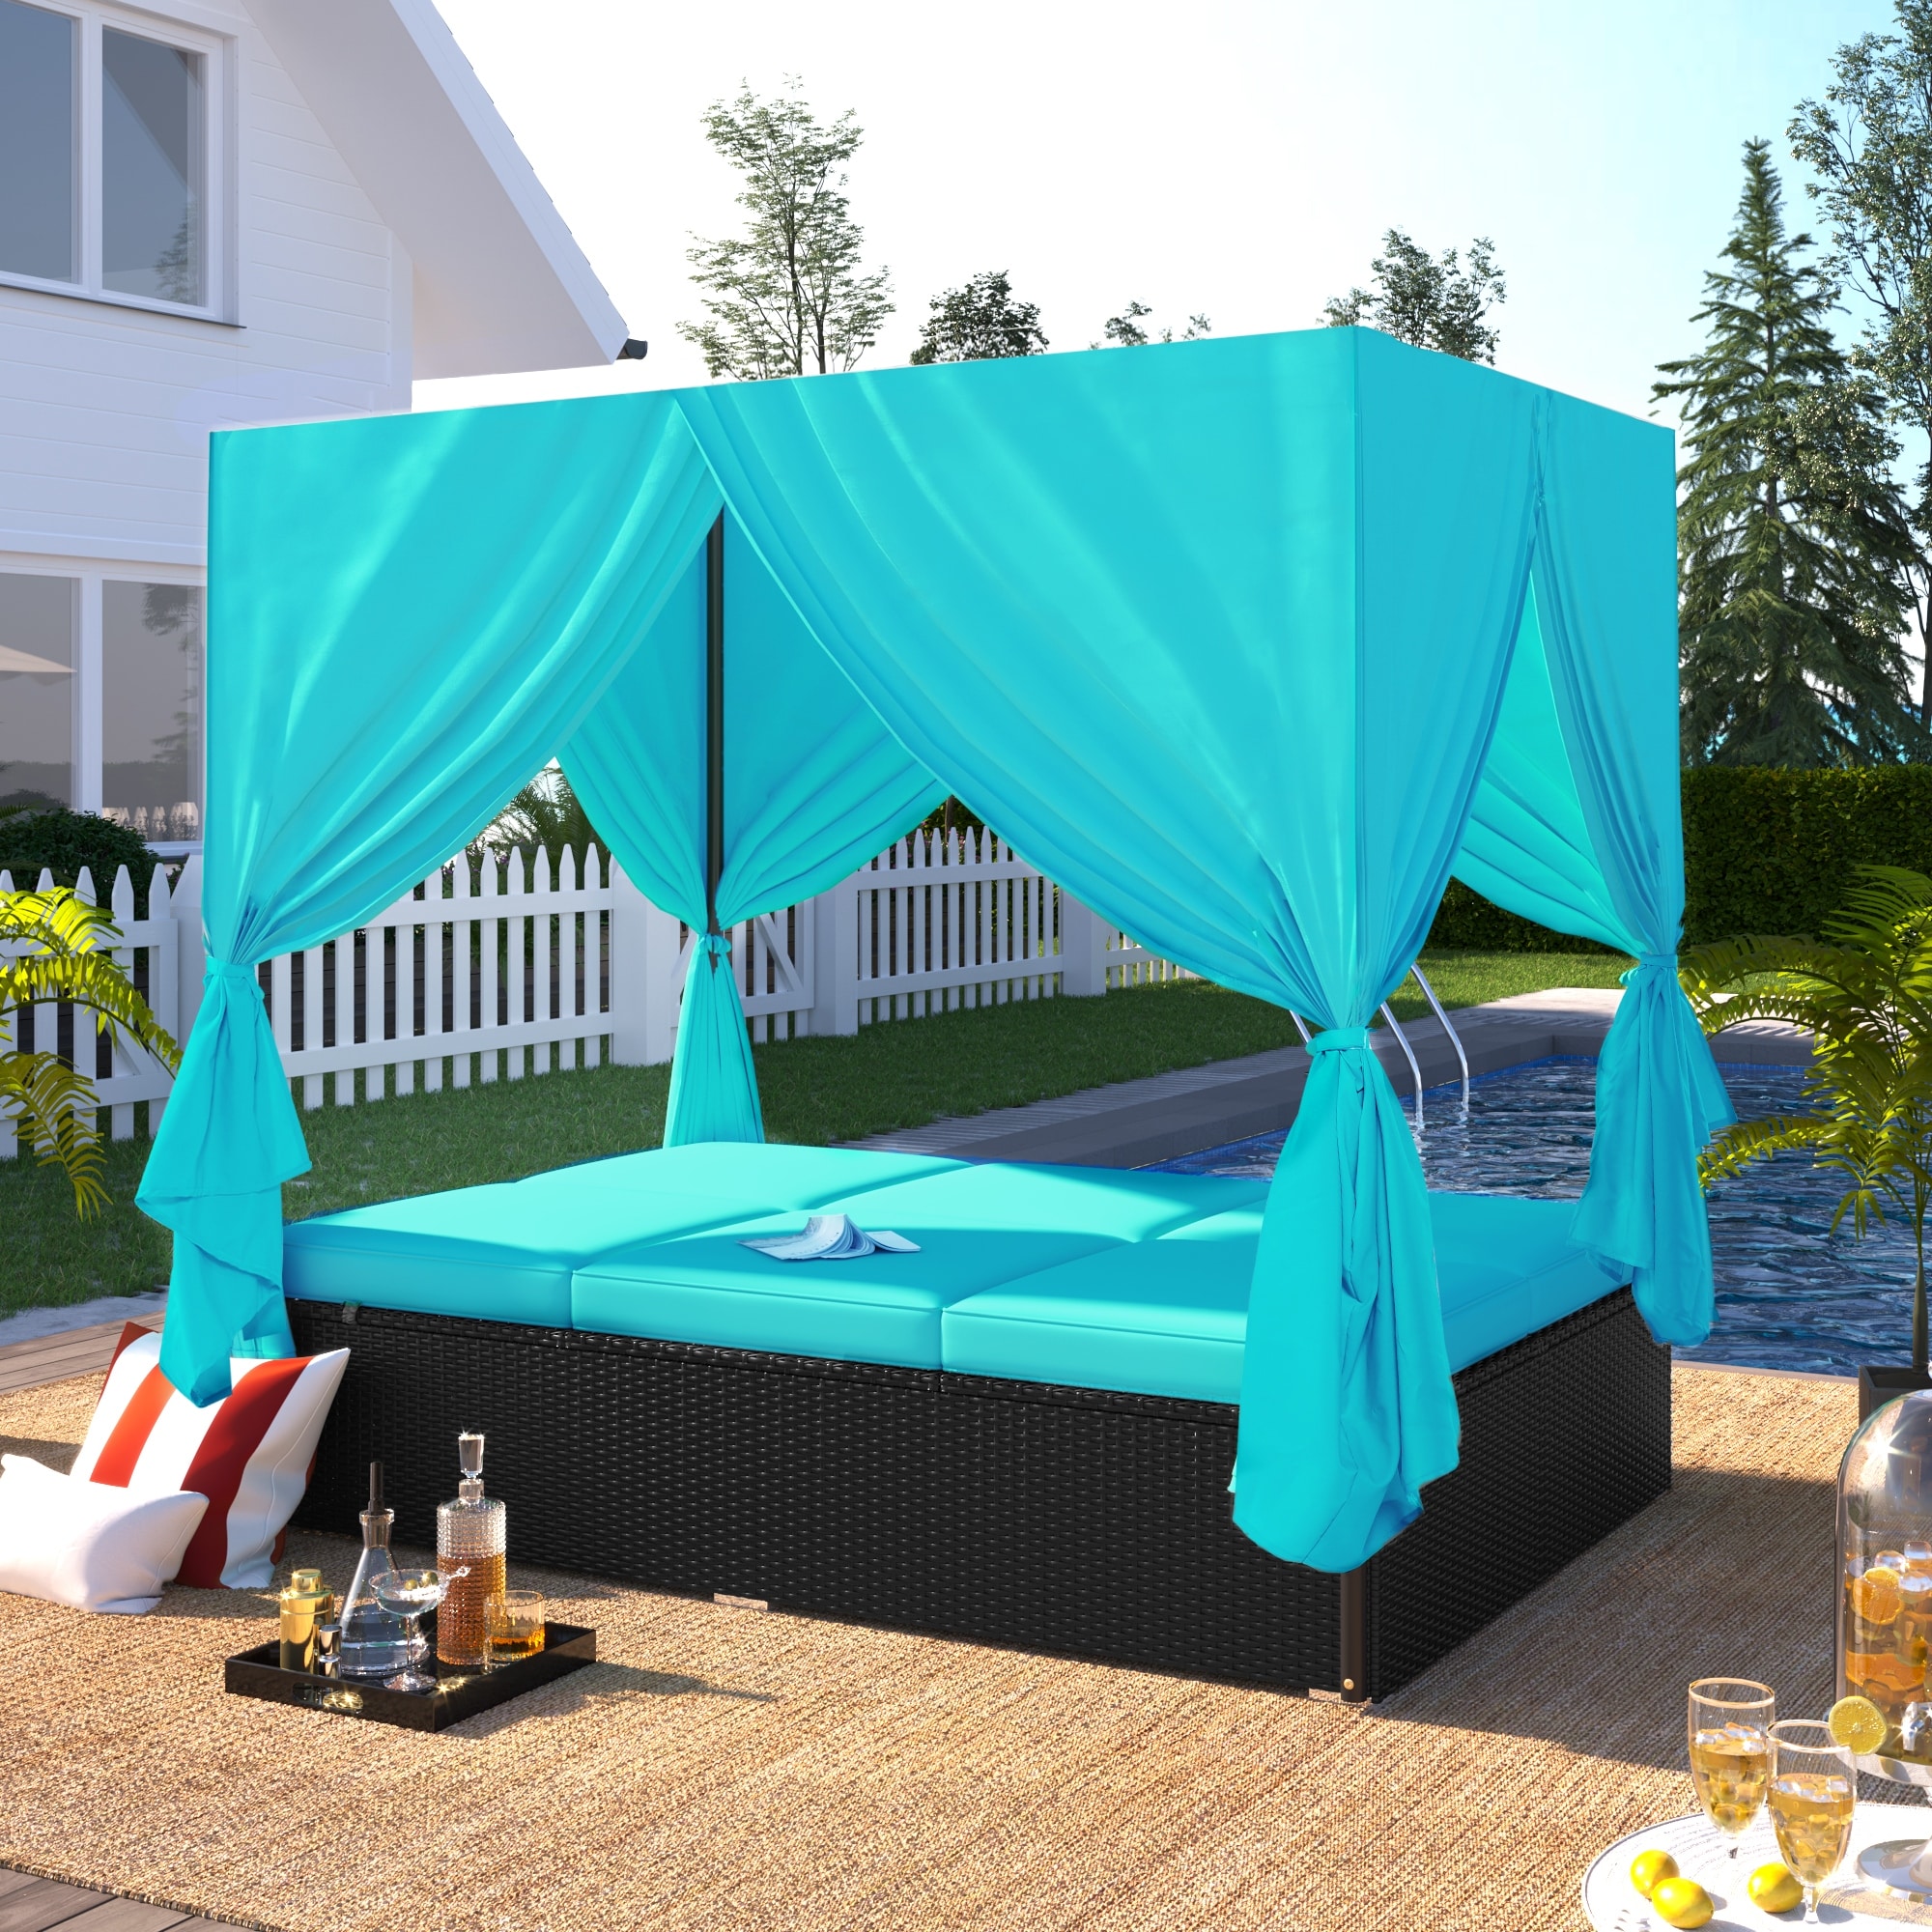 Outdoor Patio Wicker Sunbed Daybed With Cushions  Adjustable Seats